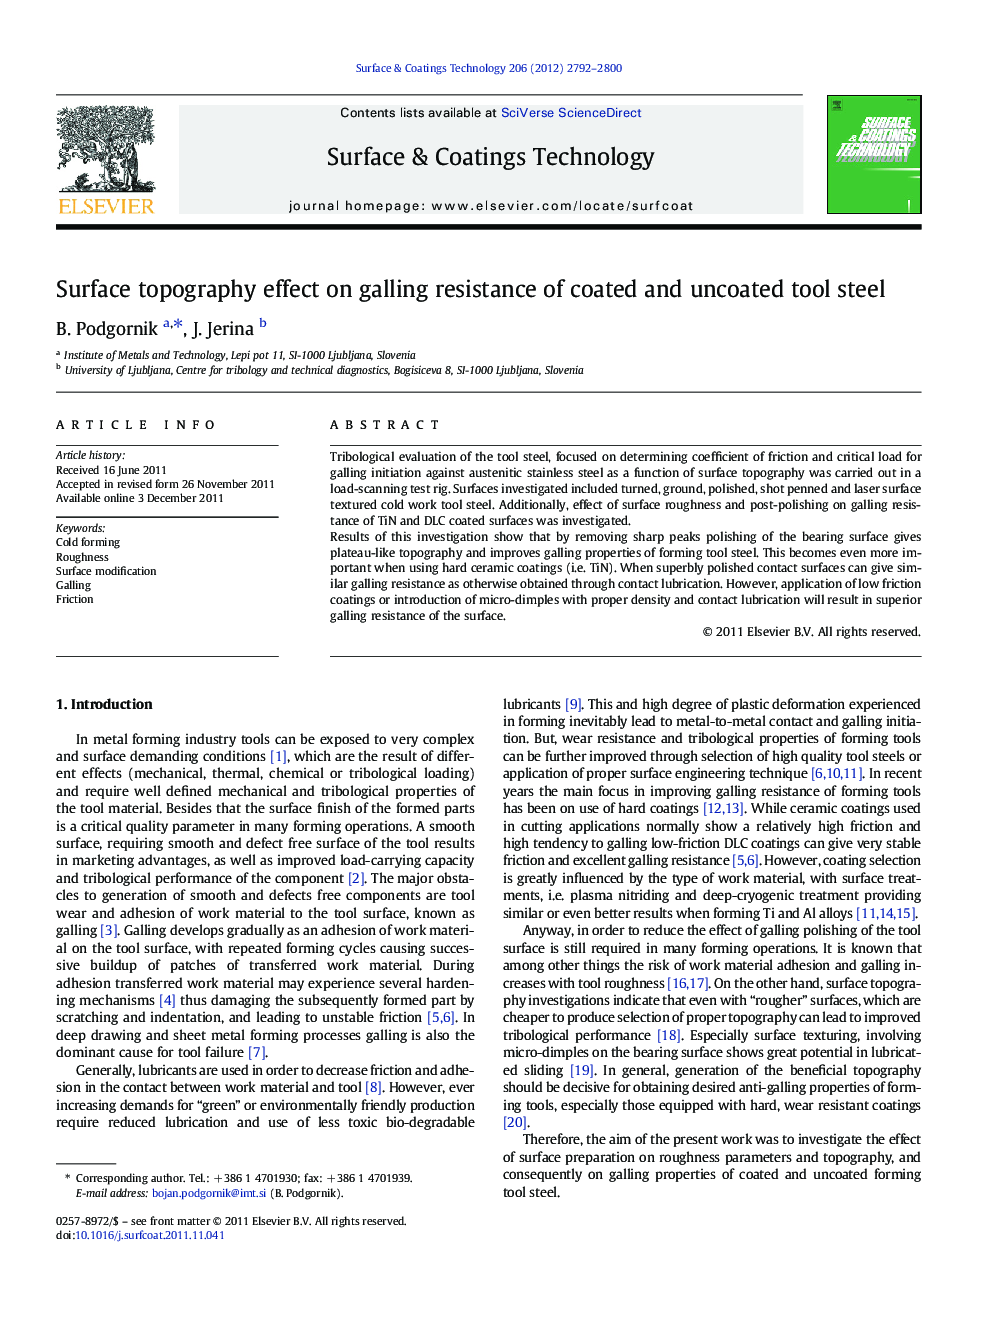 Surface topography effect on galling resistance of coated and uncoated tool steel